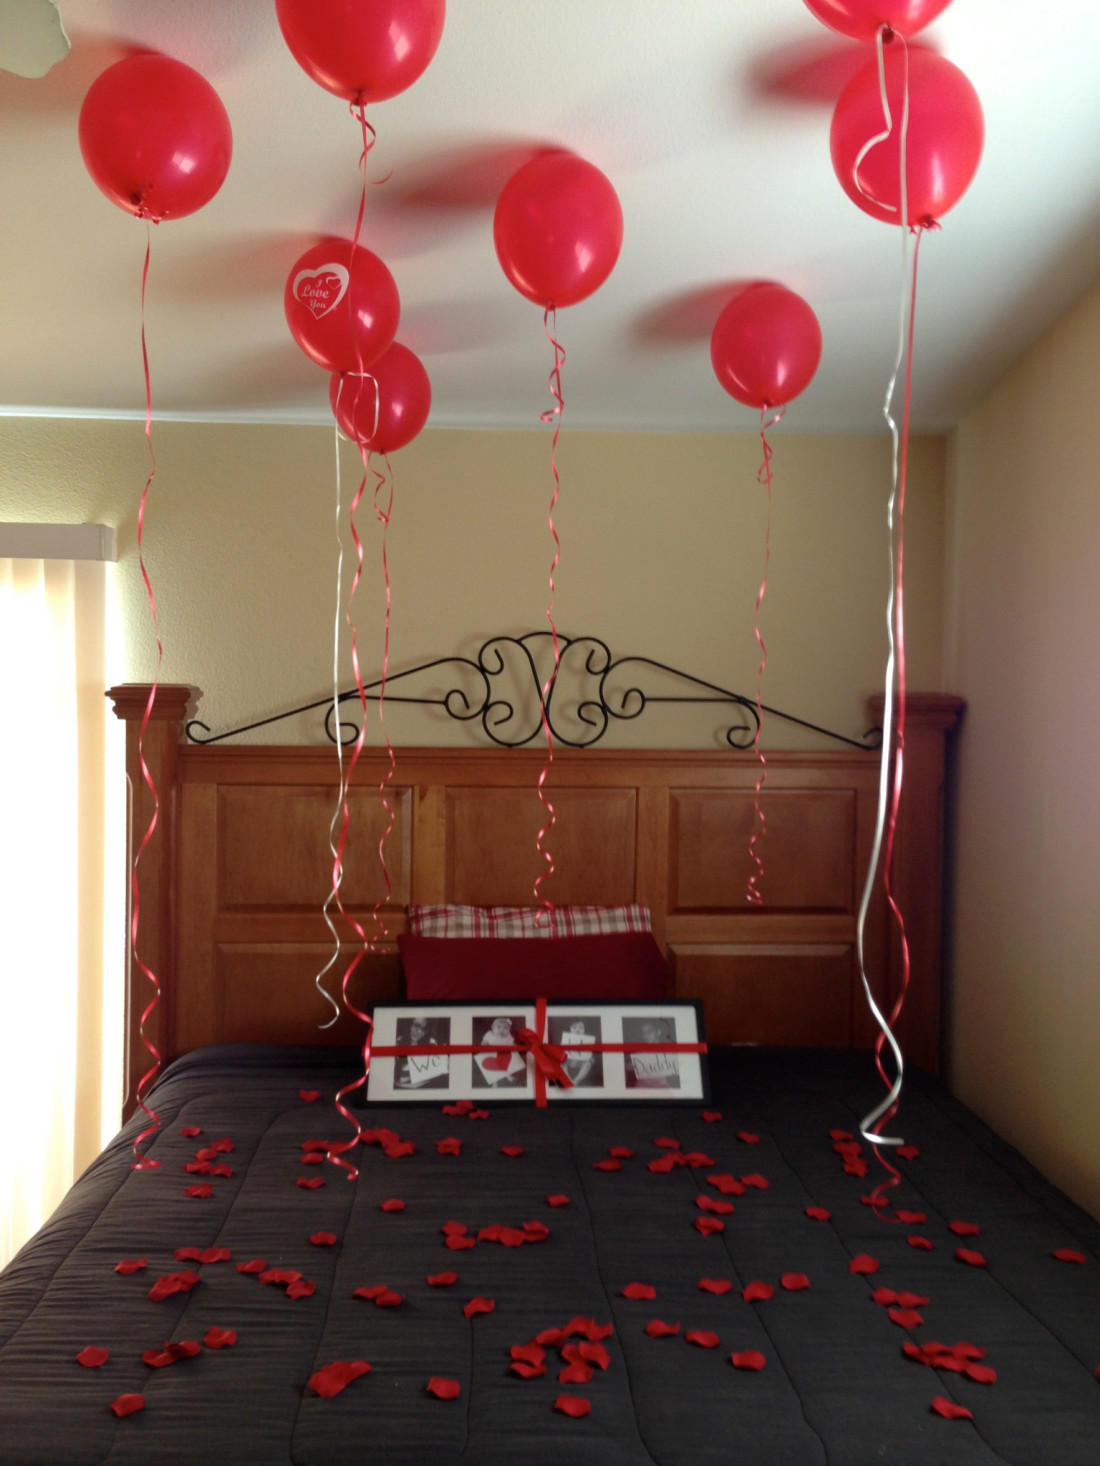 Valentines Day Ideas For Wife
 10 Creative Ways to Surprise Your Hubby for Valentine s